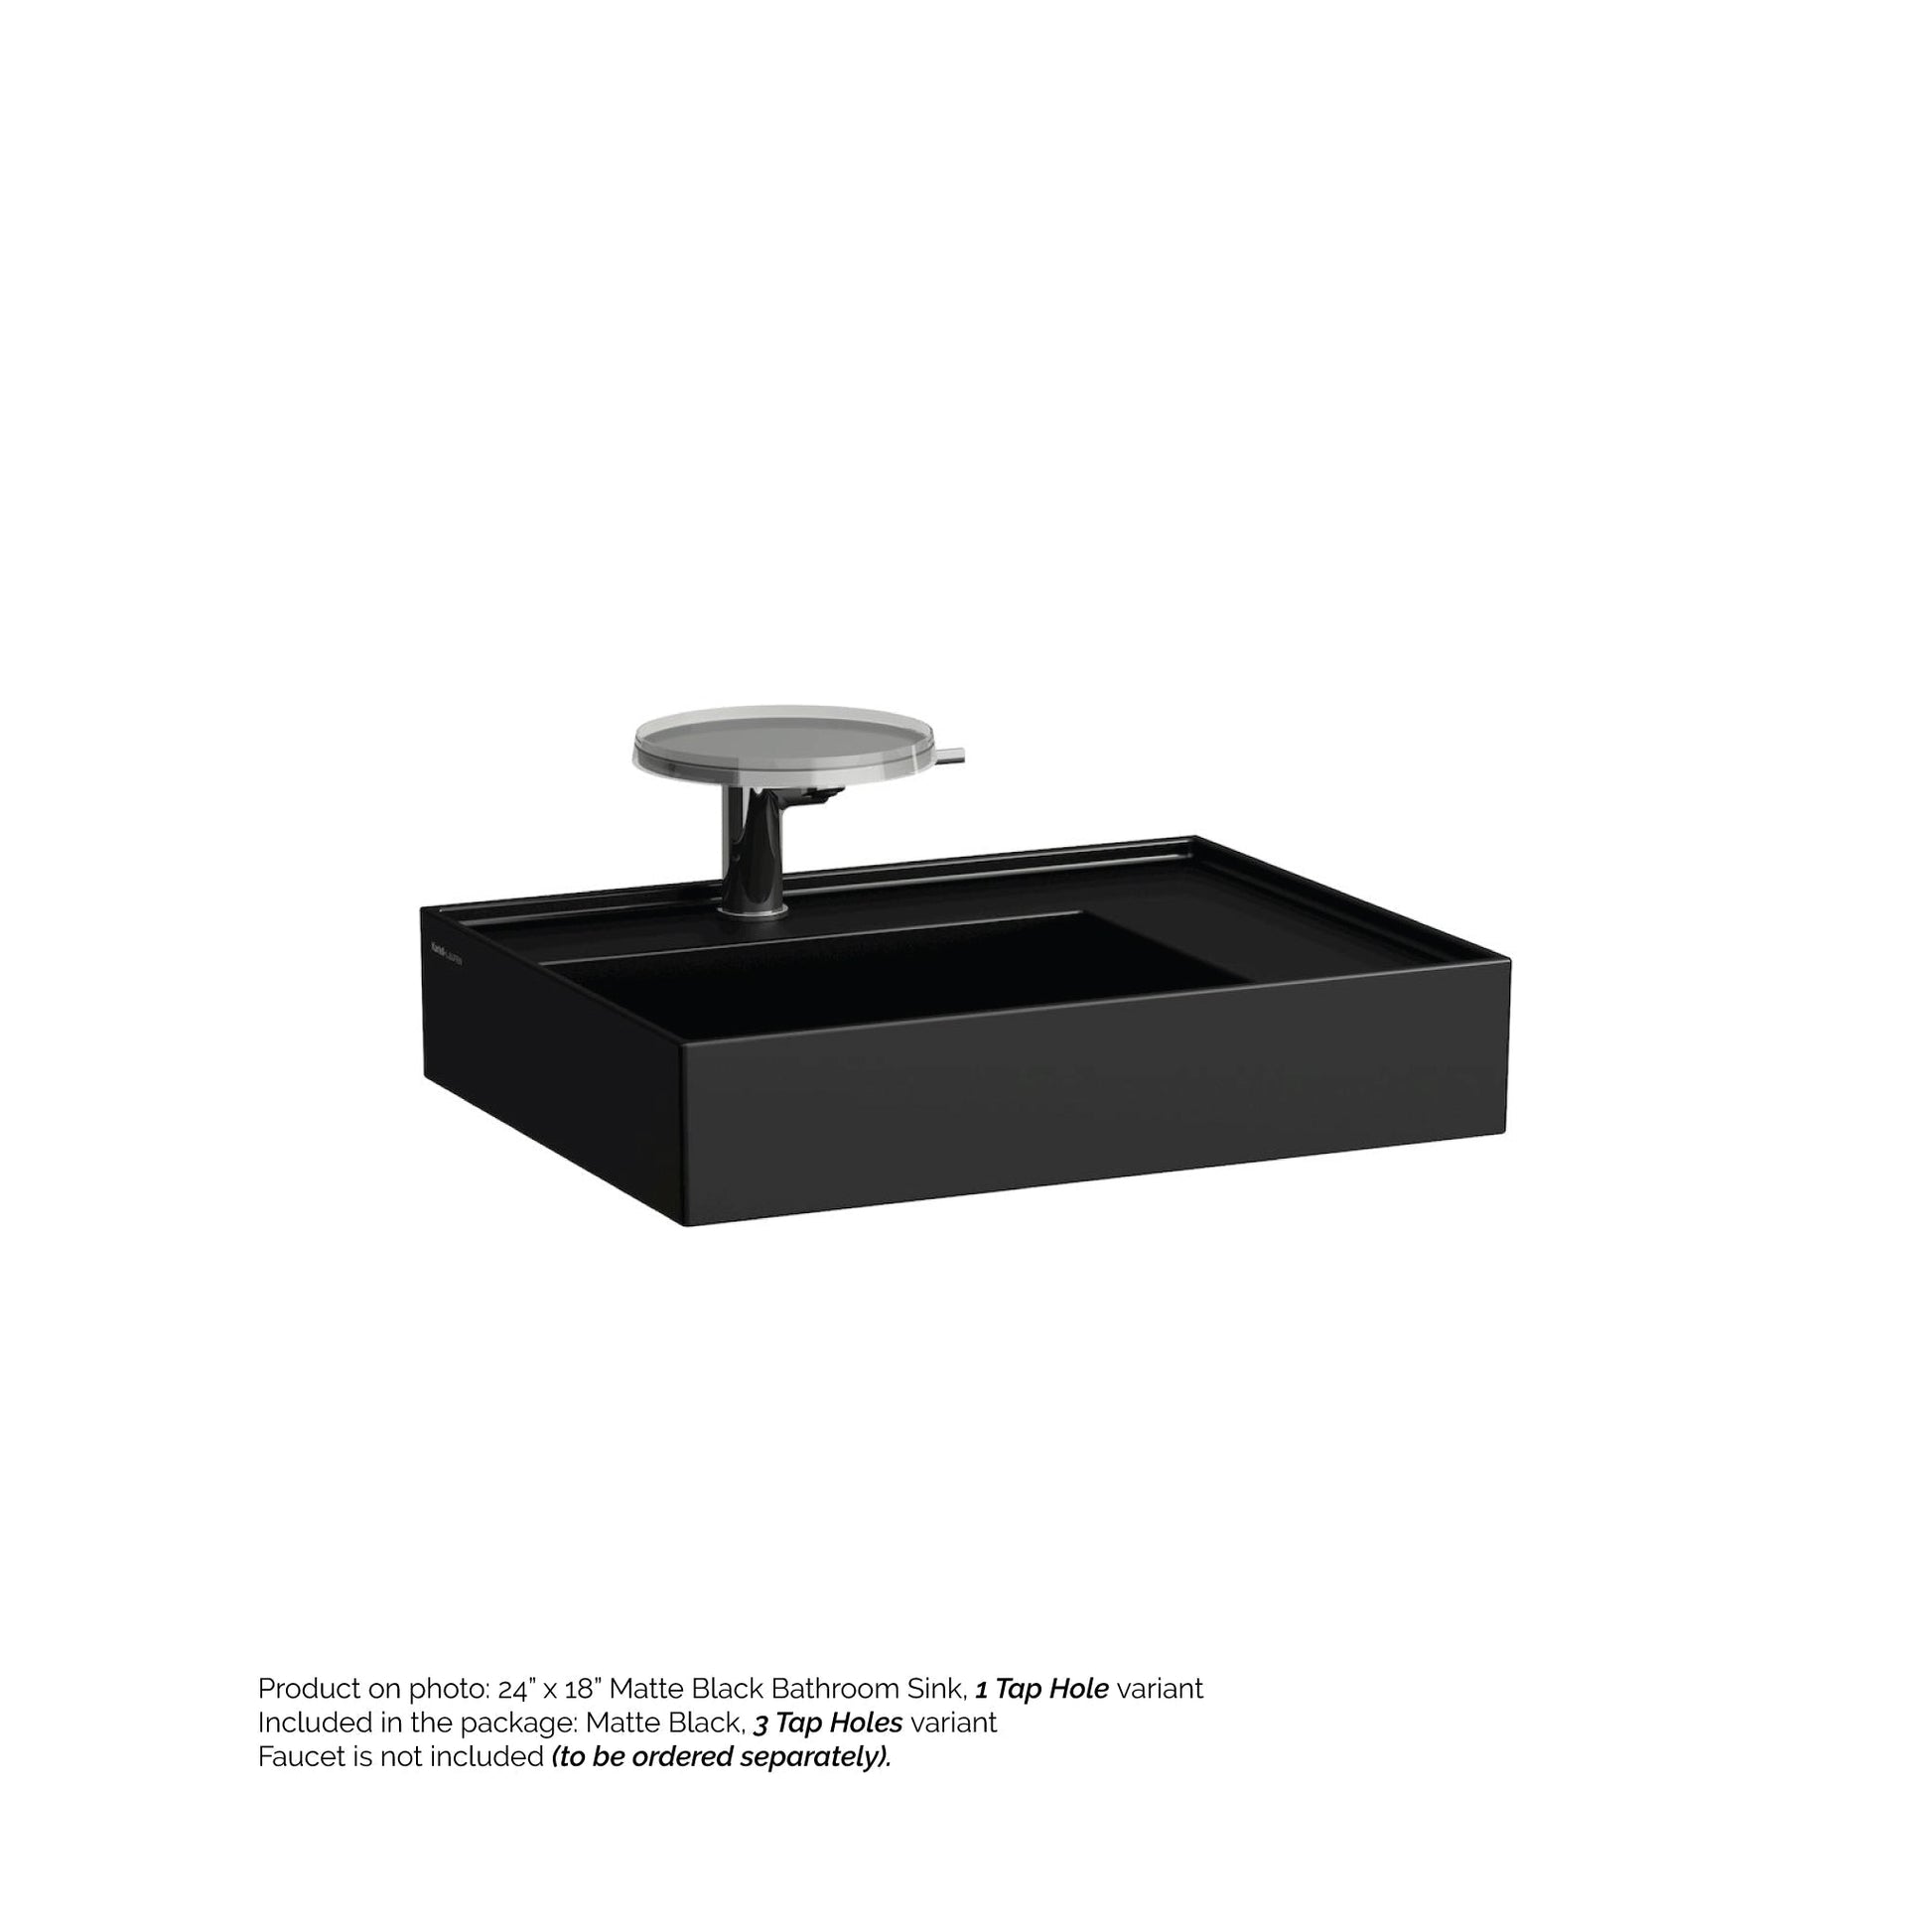 Laufen Kartell 24" x 18" Matte Black Wall-Mounted Shelf-Right Bathroom Sink With 3 Faucet Holes